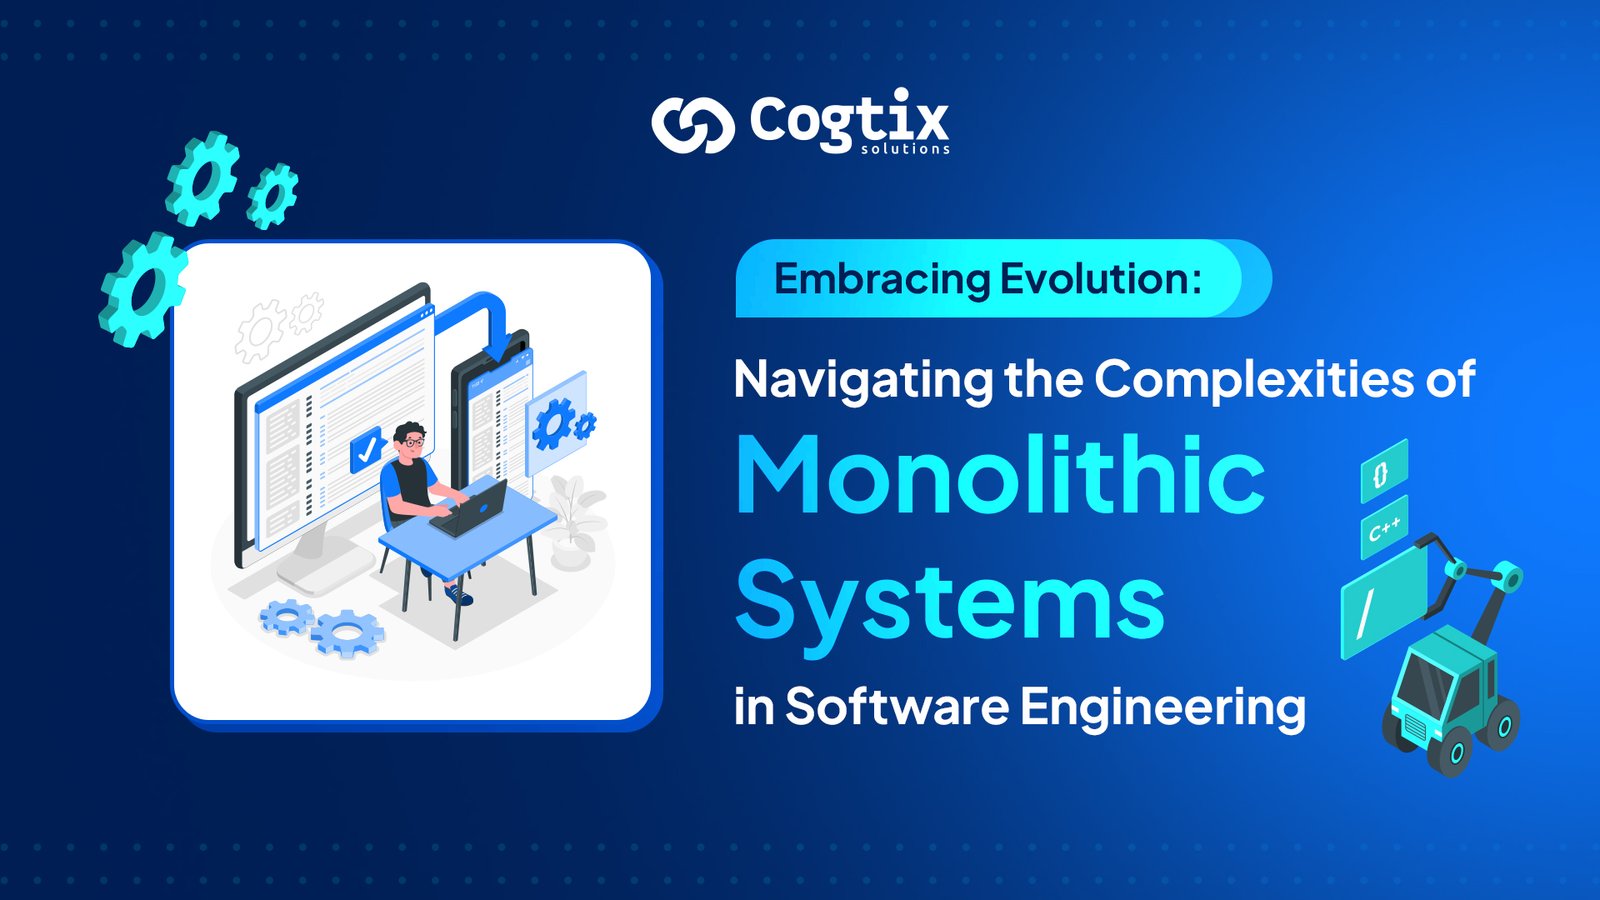 Embracing Evolution: Navigating the Complexities of Monolithic Systems in Software Engineering